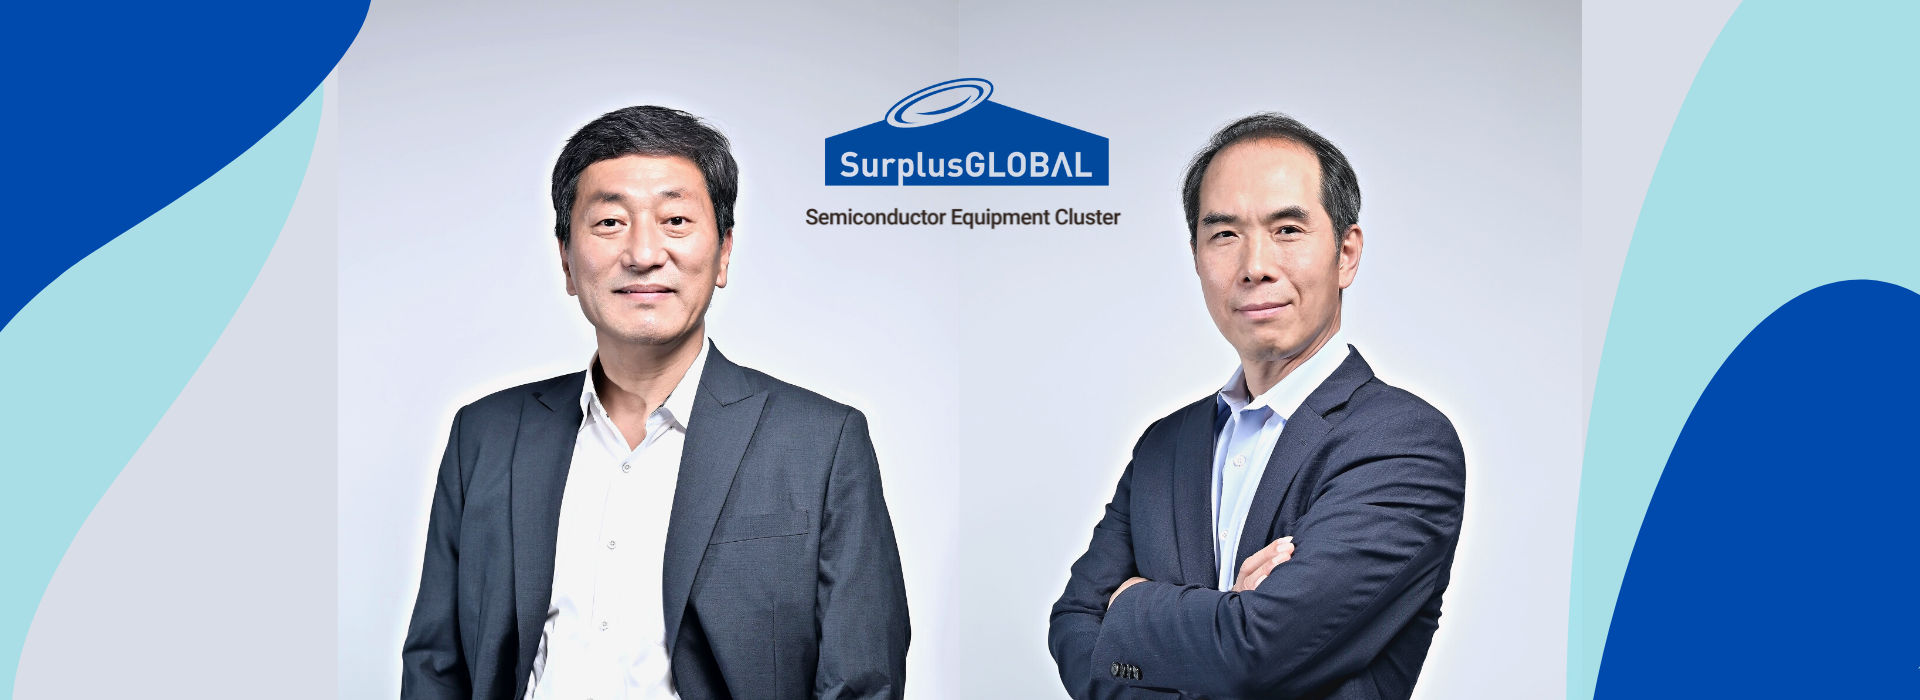 Bruce Kim CEO and James Park COO